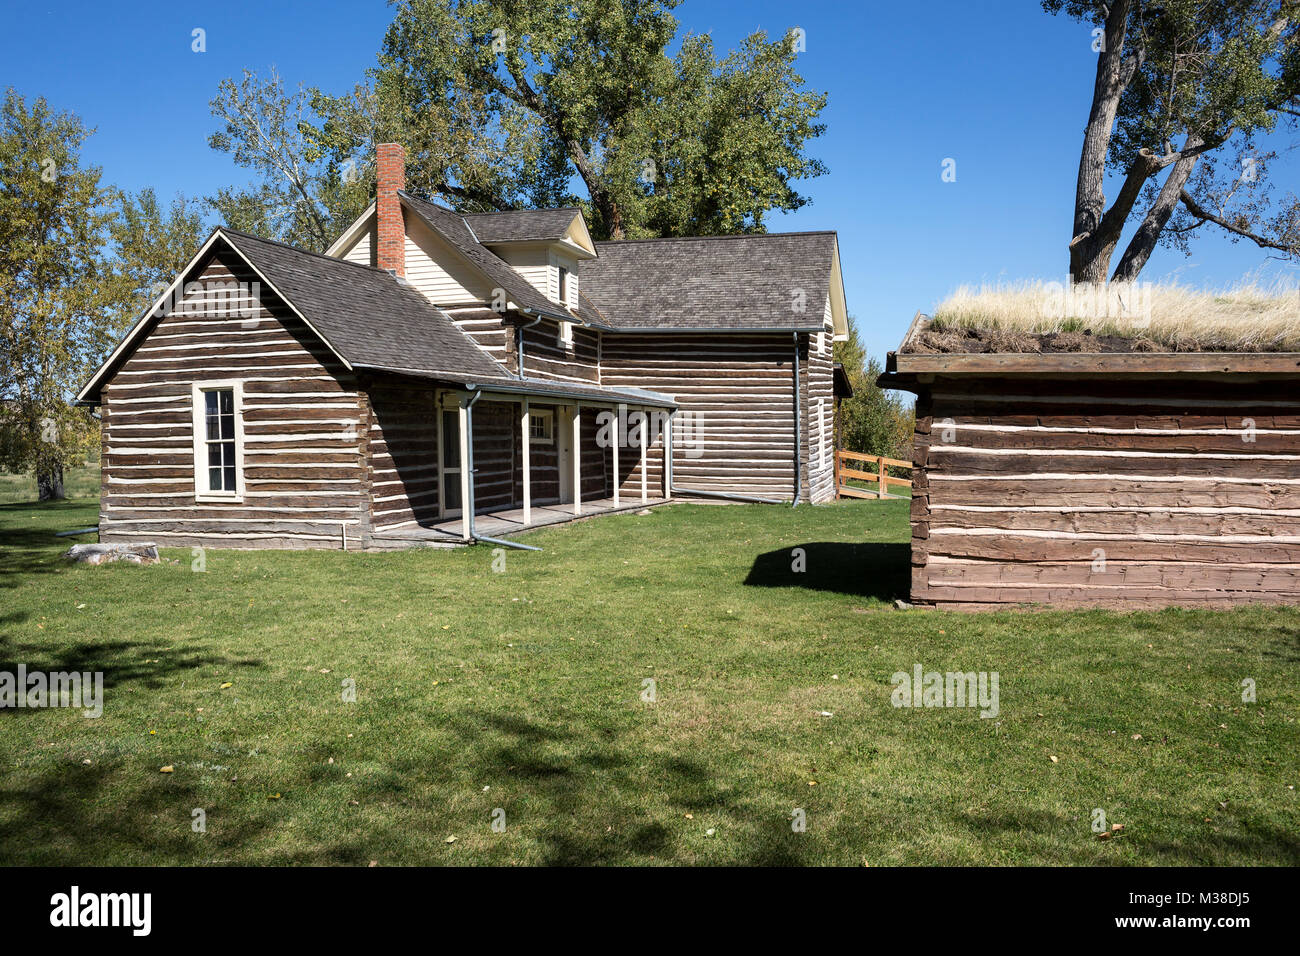 MT 00101-00 ... MONTANA-House bei Chief viel Coups State Park auf yjr Crow Indian Reservation. Stockfoto